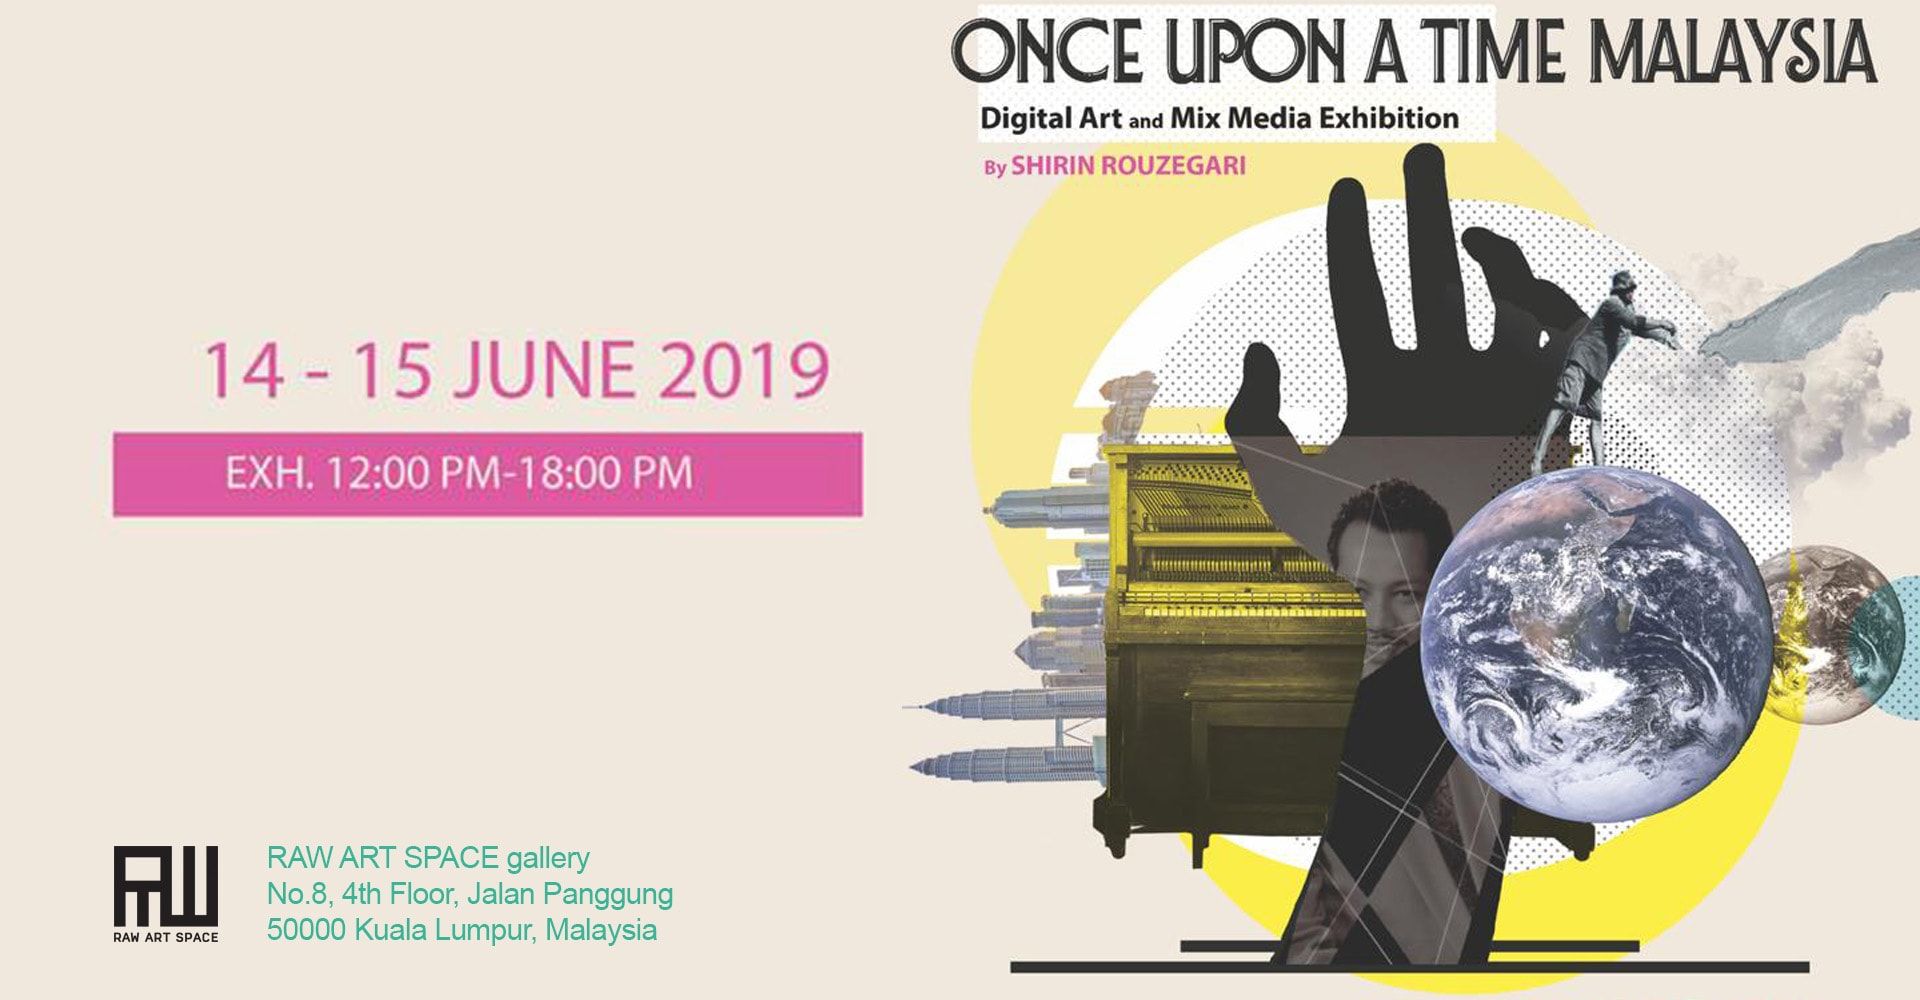 Once Upon a Time Malaysia-Digital Art and Mix Media Exhibition by Shirin Rouzegari